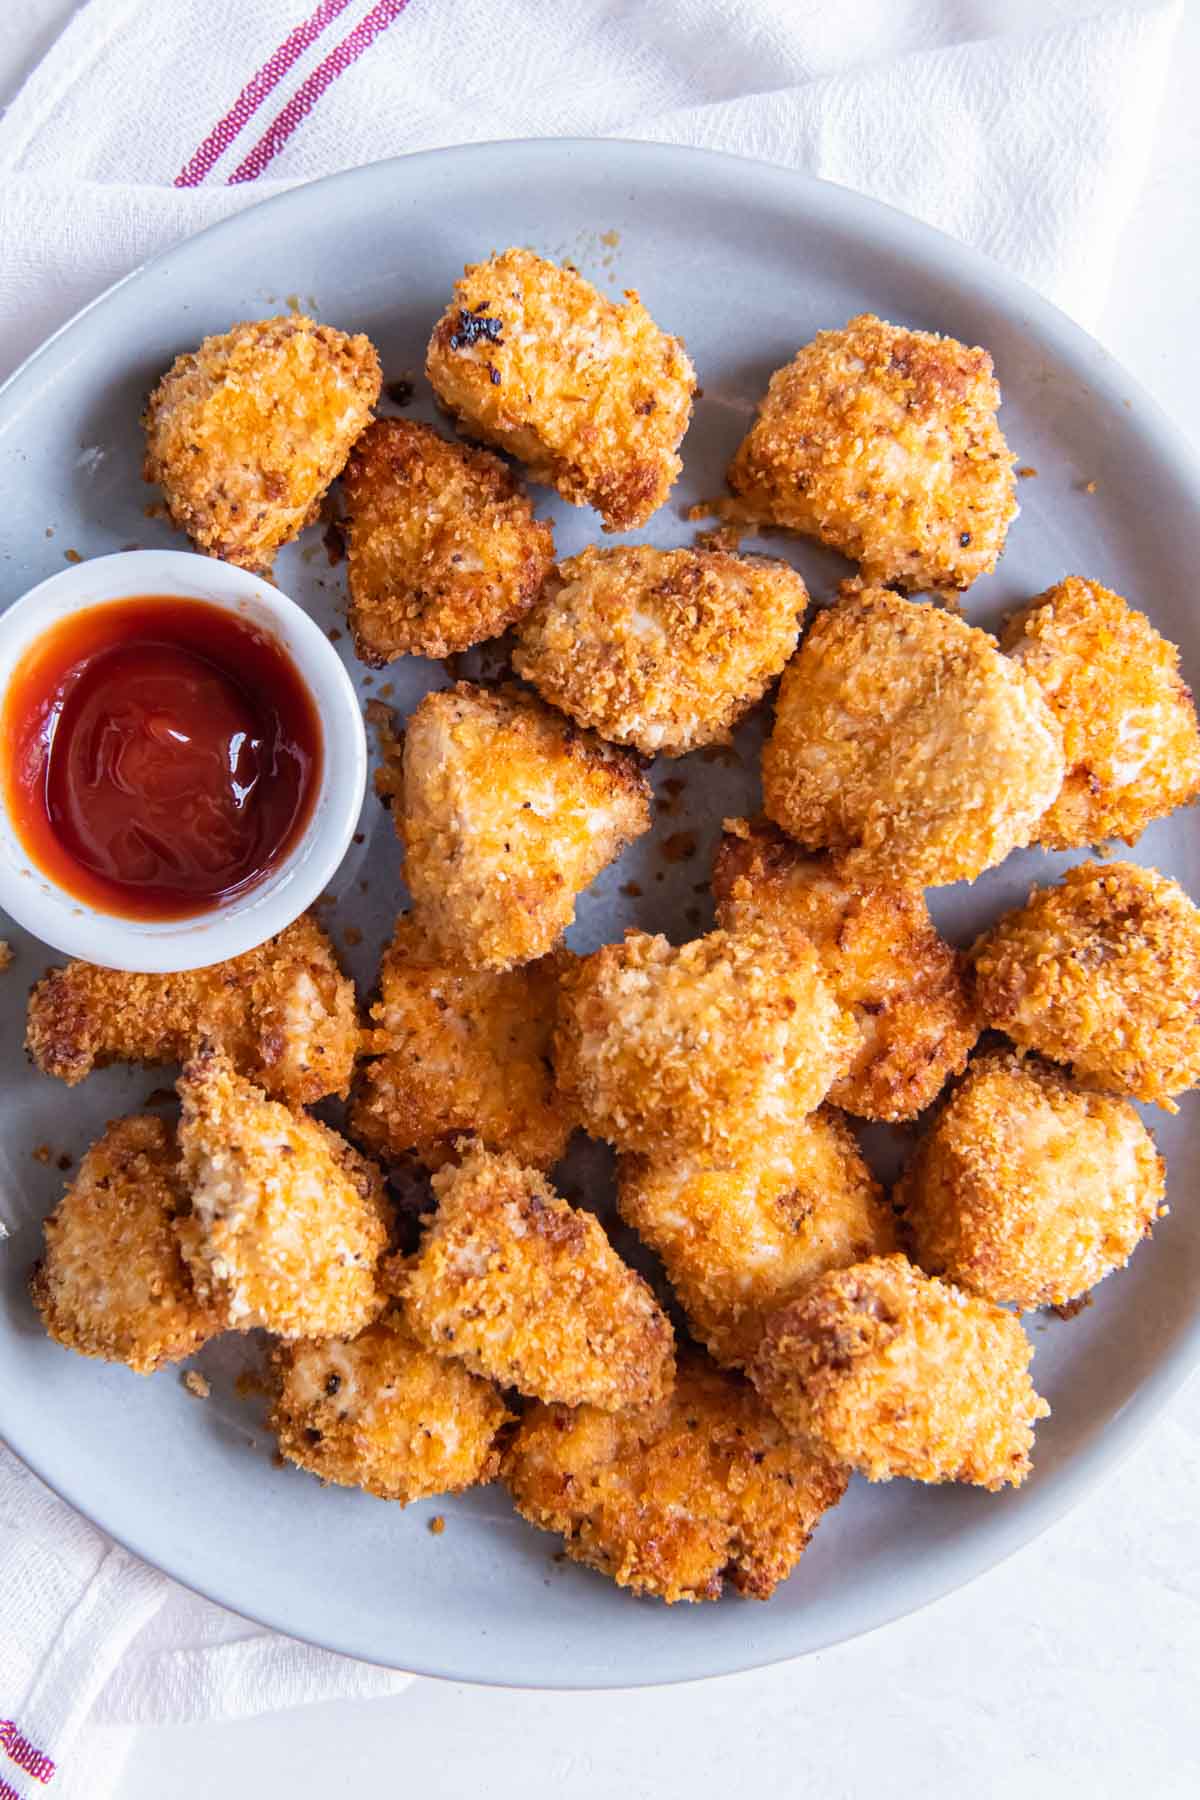 Air fryer chicken nuggets served on a plate with a small dish of ketchup.